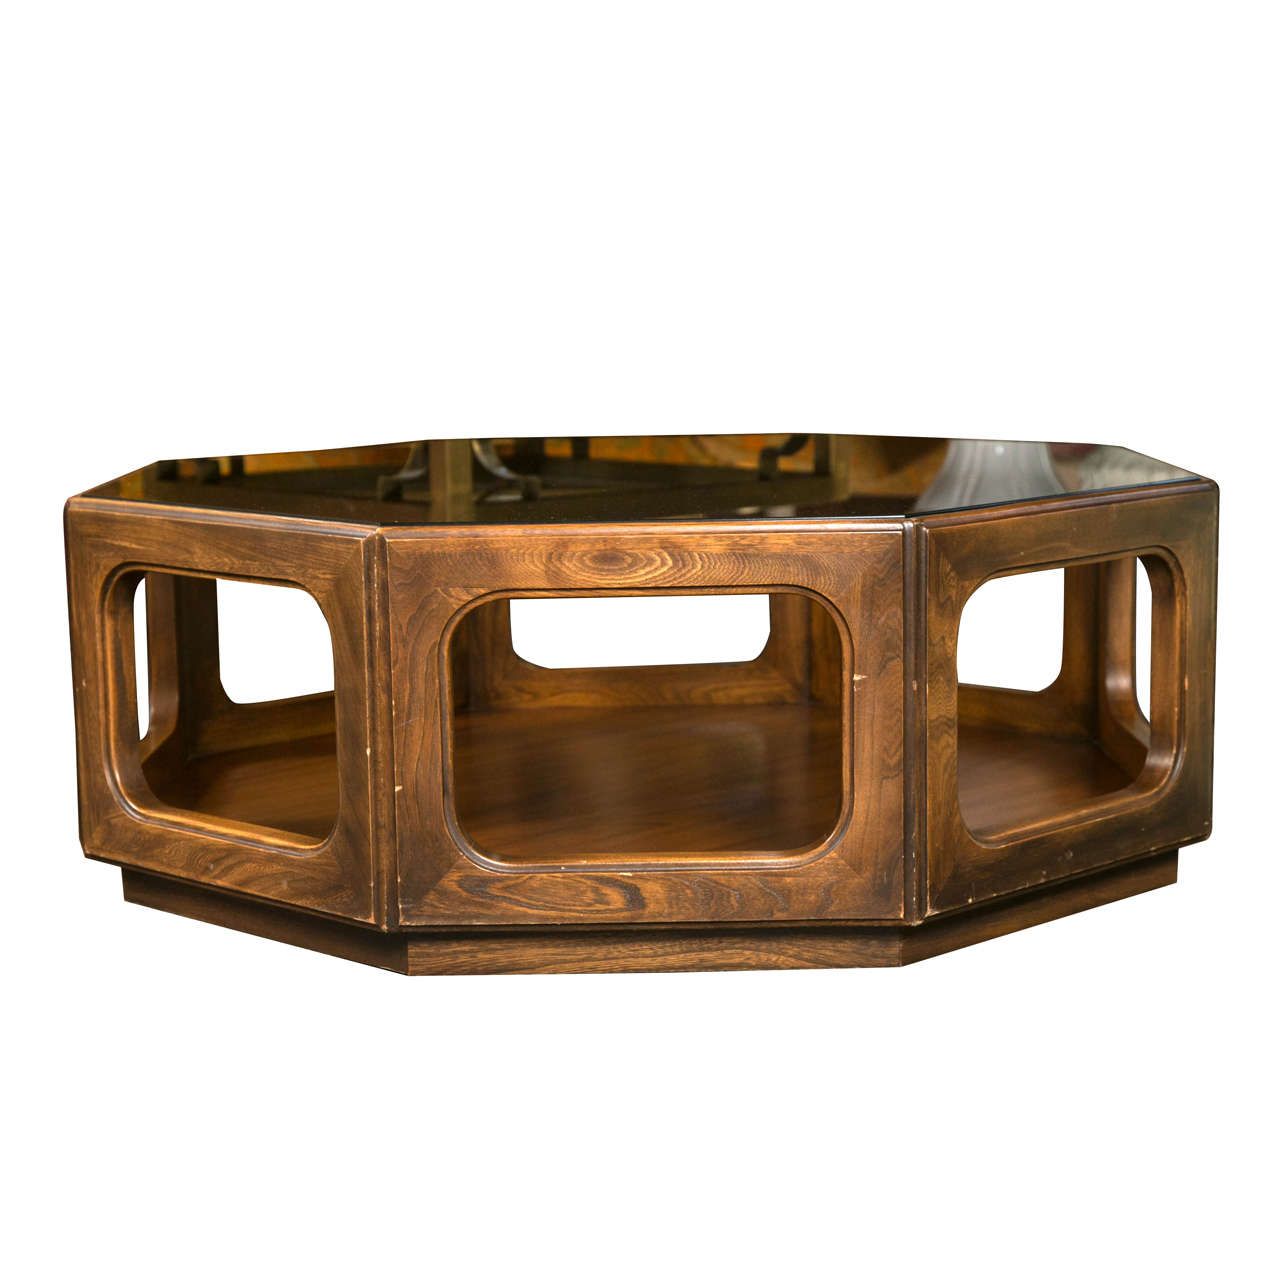 Most Recent Octagonal Midcentury Glass Top Coffee Table For Sale At Pertaining To Octagon Coffee Tables (View 19 of 20)